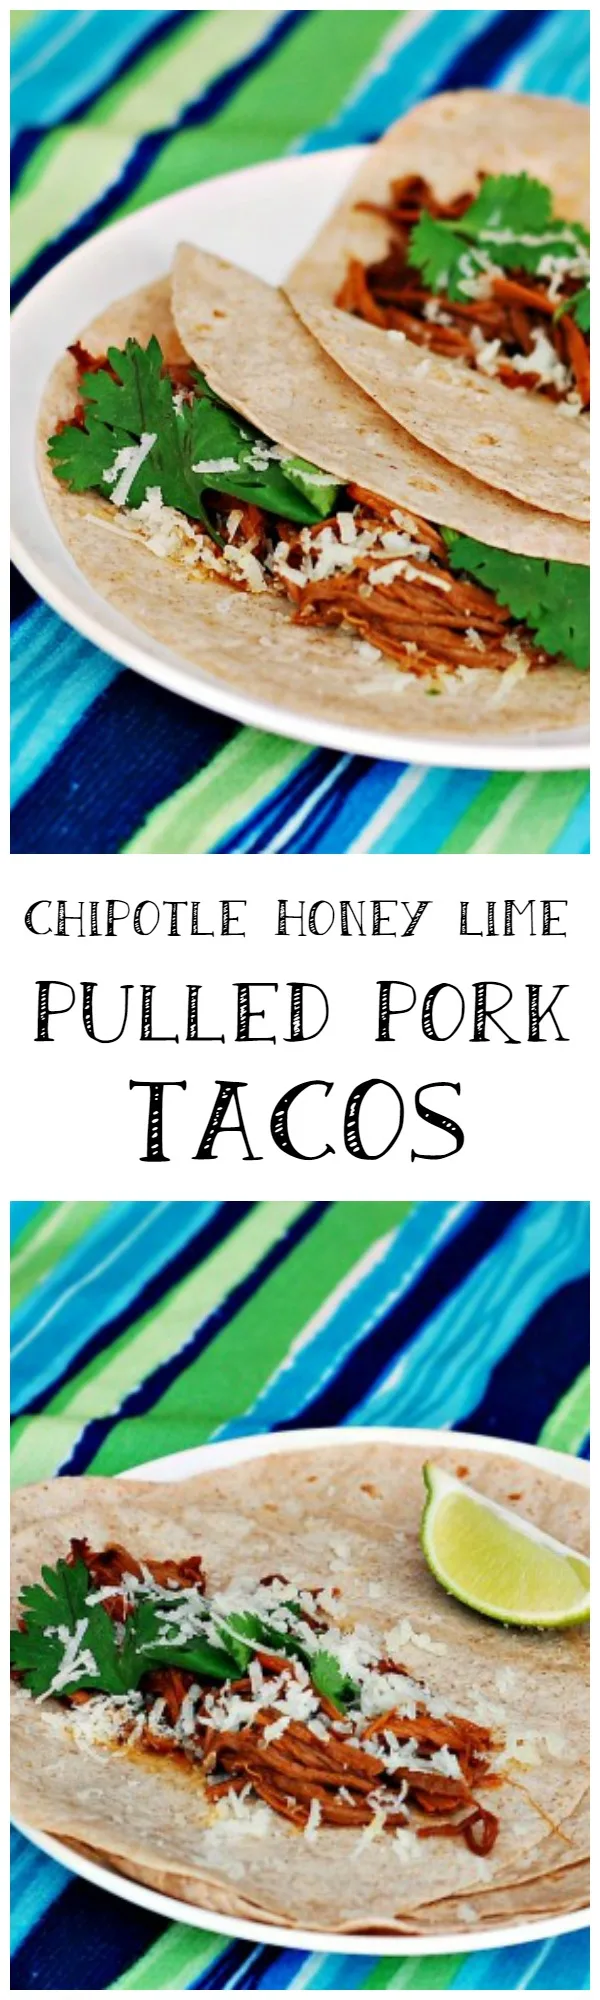 “Man Food” is all about big bold flavors, and these chipotle honey lime pulled pork tacos deliver! Make them for the dad in your life this #FathersDay | theredheadbaker.com